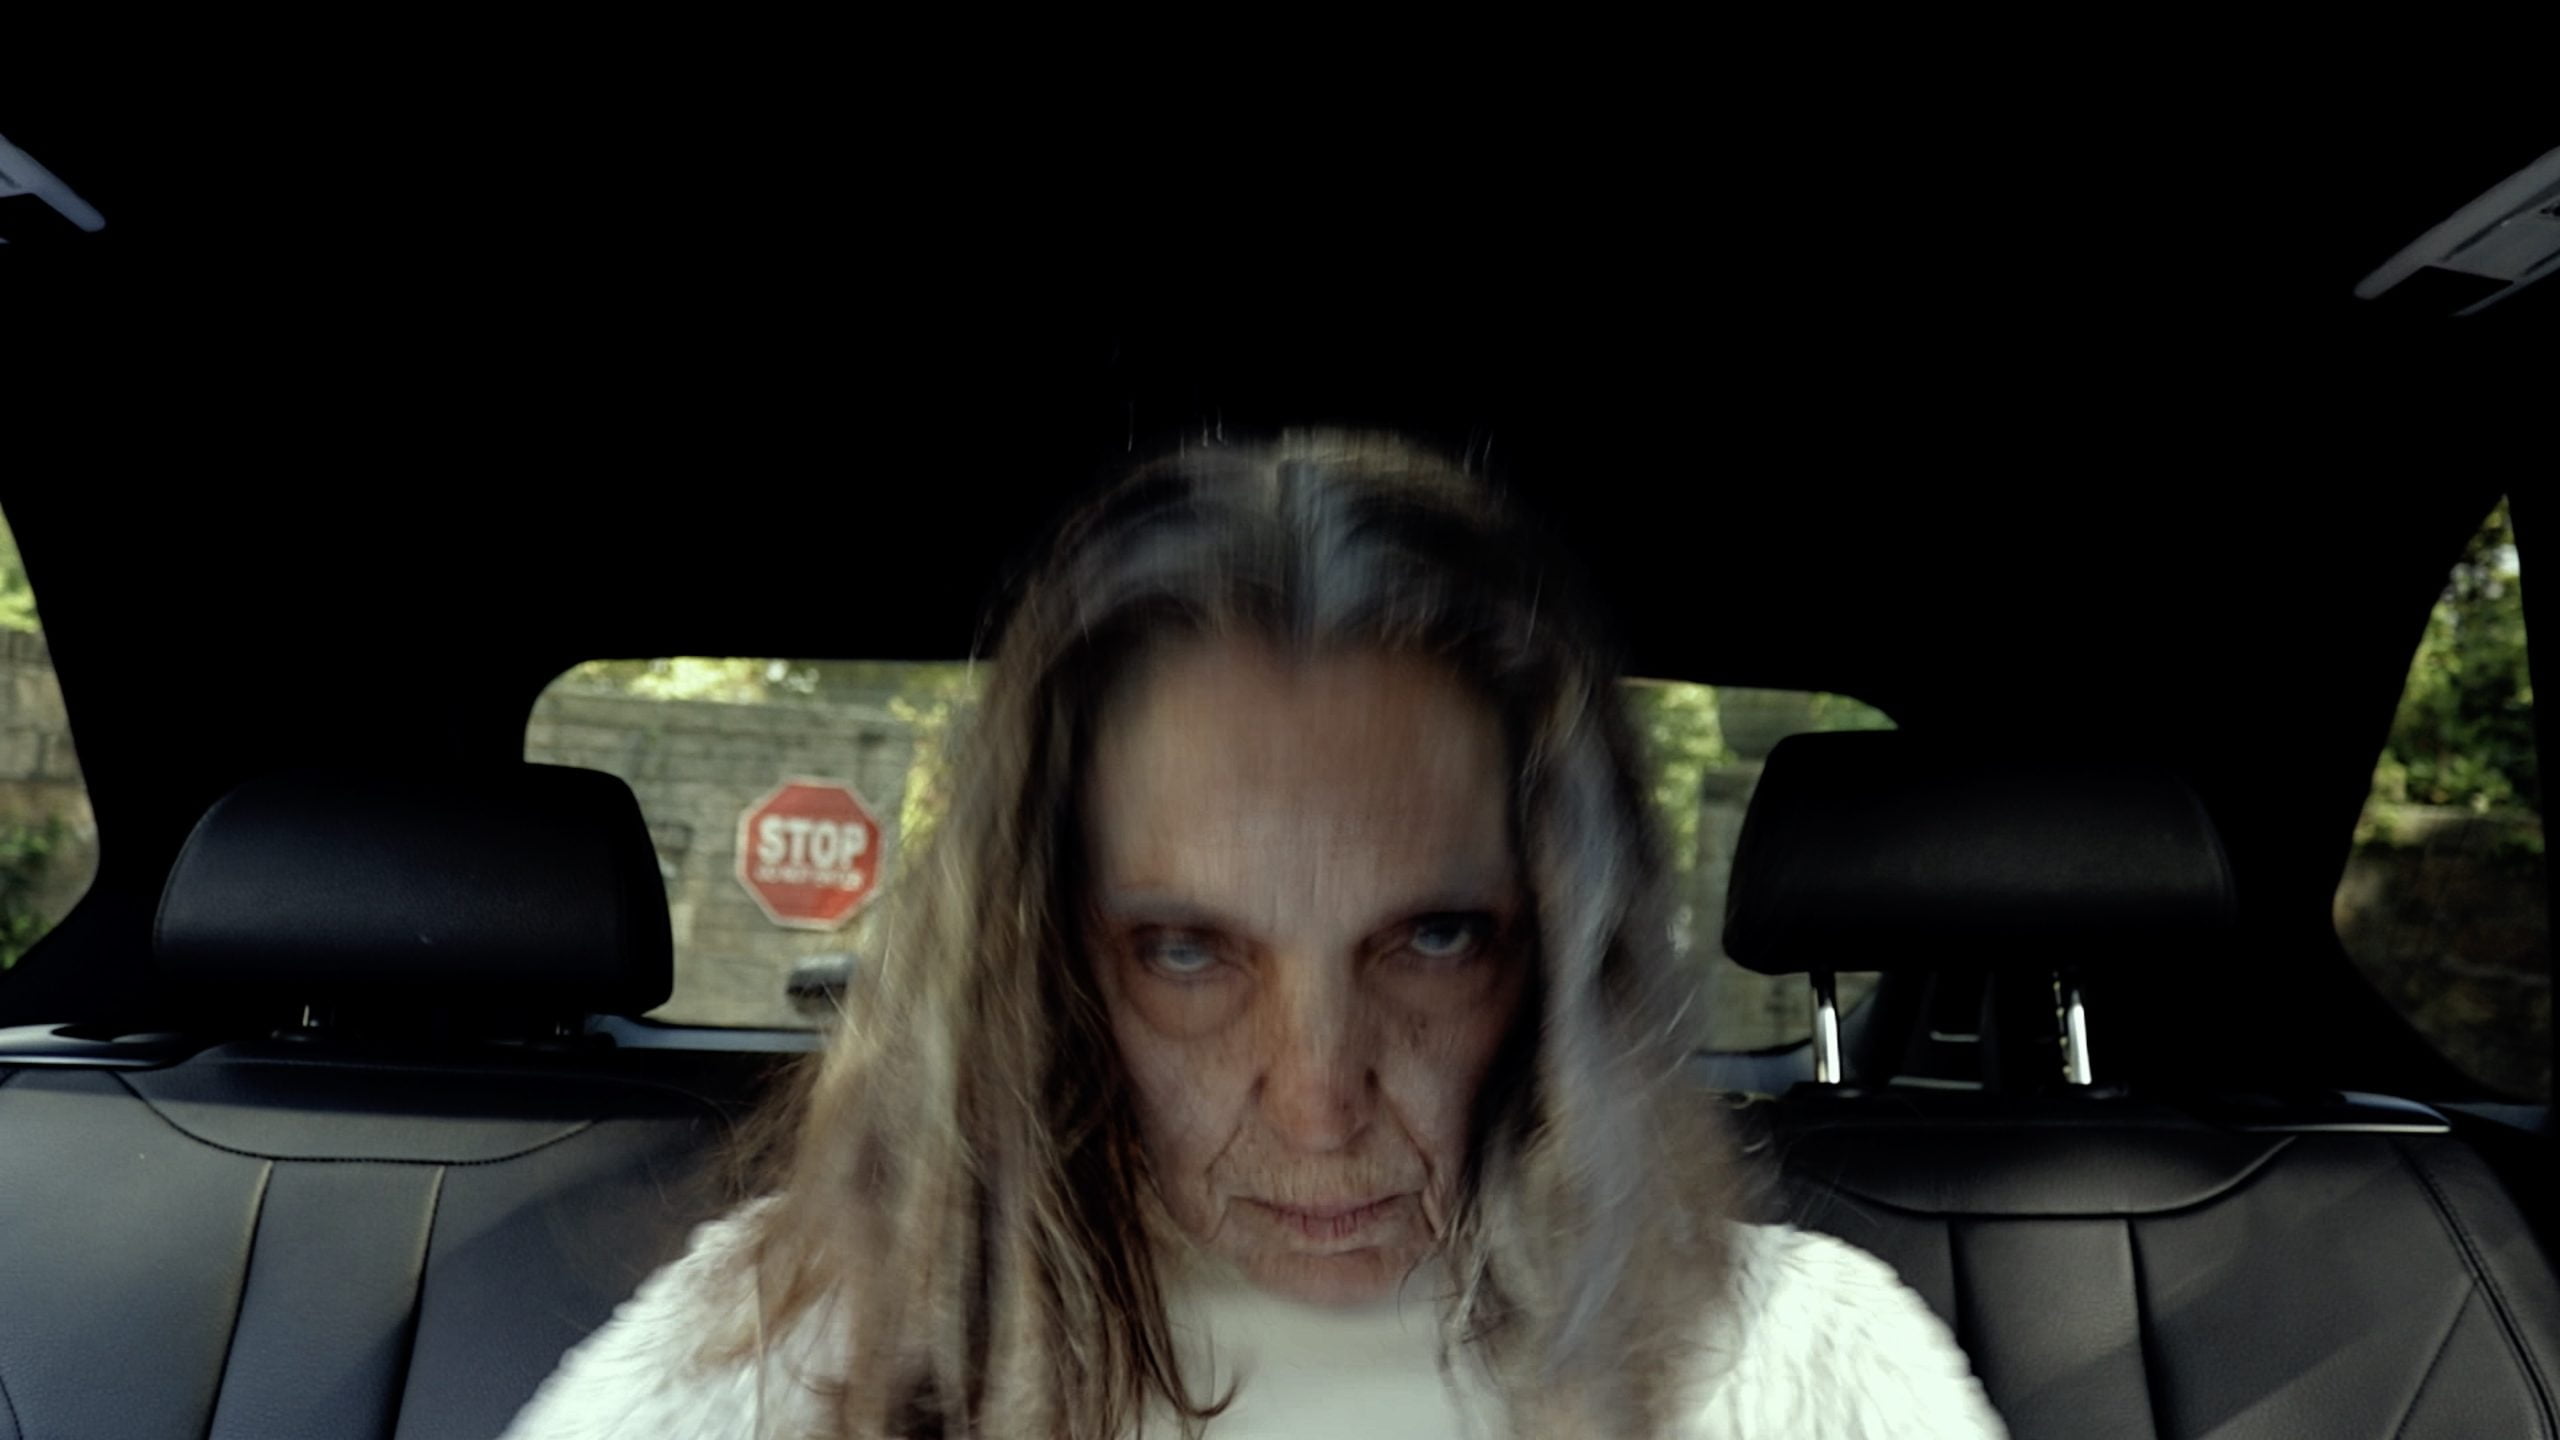 Shot of an old woman in the back of a car